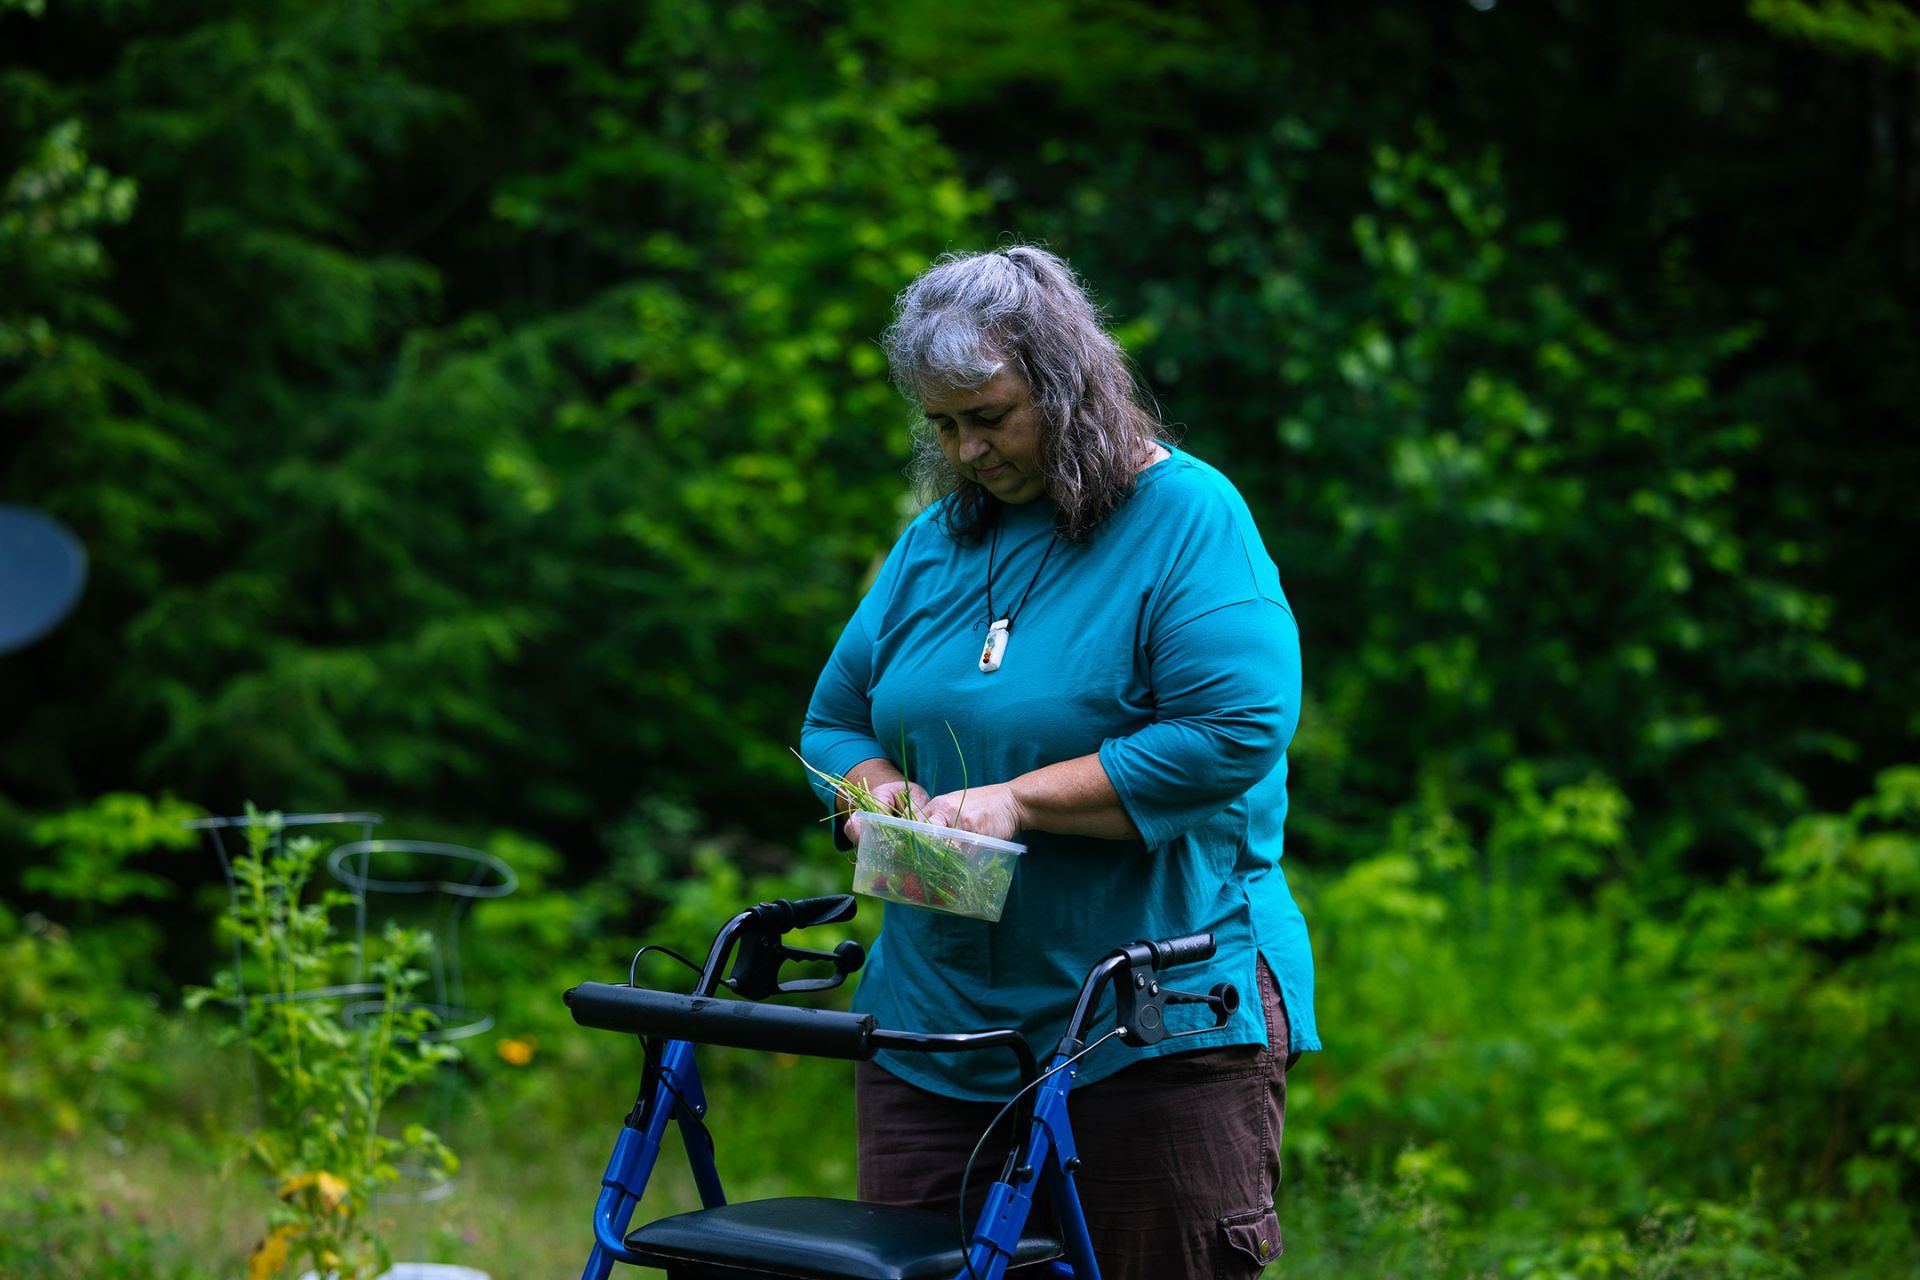 Kandie Cleaves collects vegetables in her garden. She is wearing a blue shirt and dark pants, and is using a blue walker. She wears a medical alert necklace.